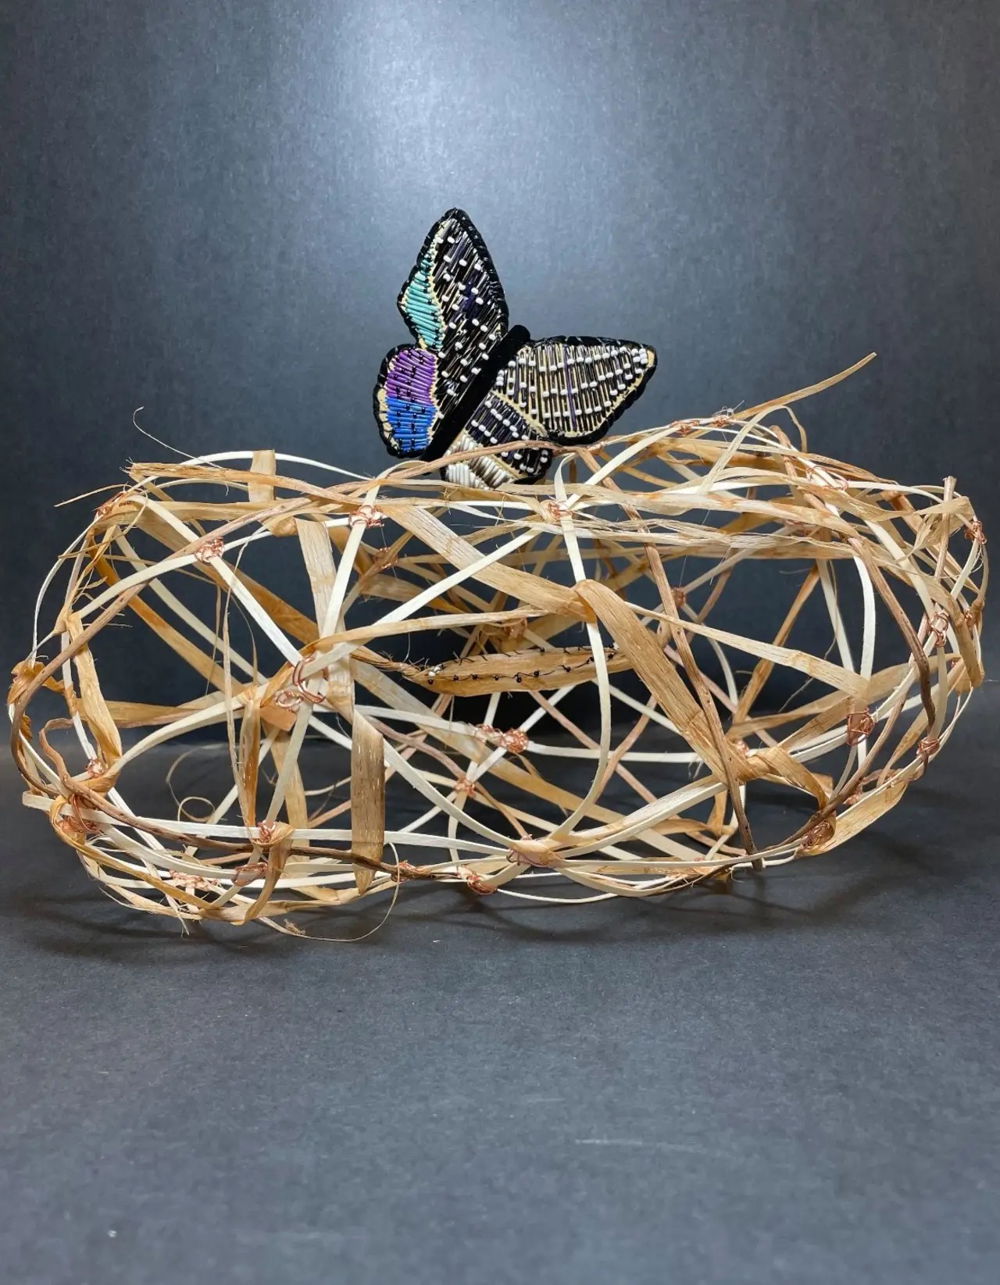 [ID: A small, oblong sculpture constructed from knotted strands of fiber. The fiber resembles that of dried grass: golden beige in color and fragile with fraying edges. Perched on top of the precarious structure is a solitary butterfly with purple, blue, and black beaded wings.]